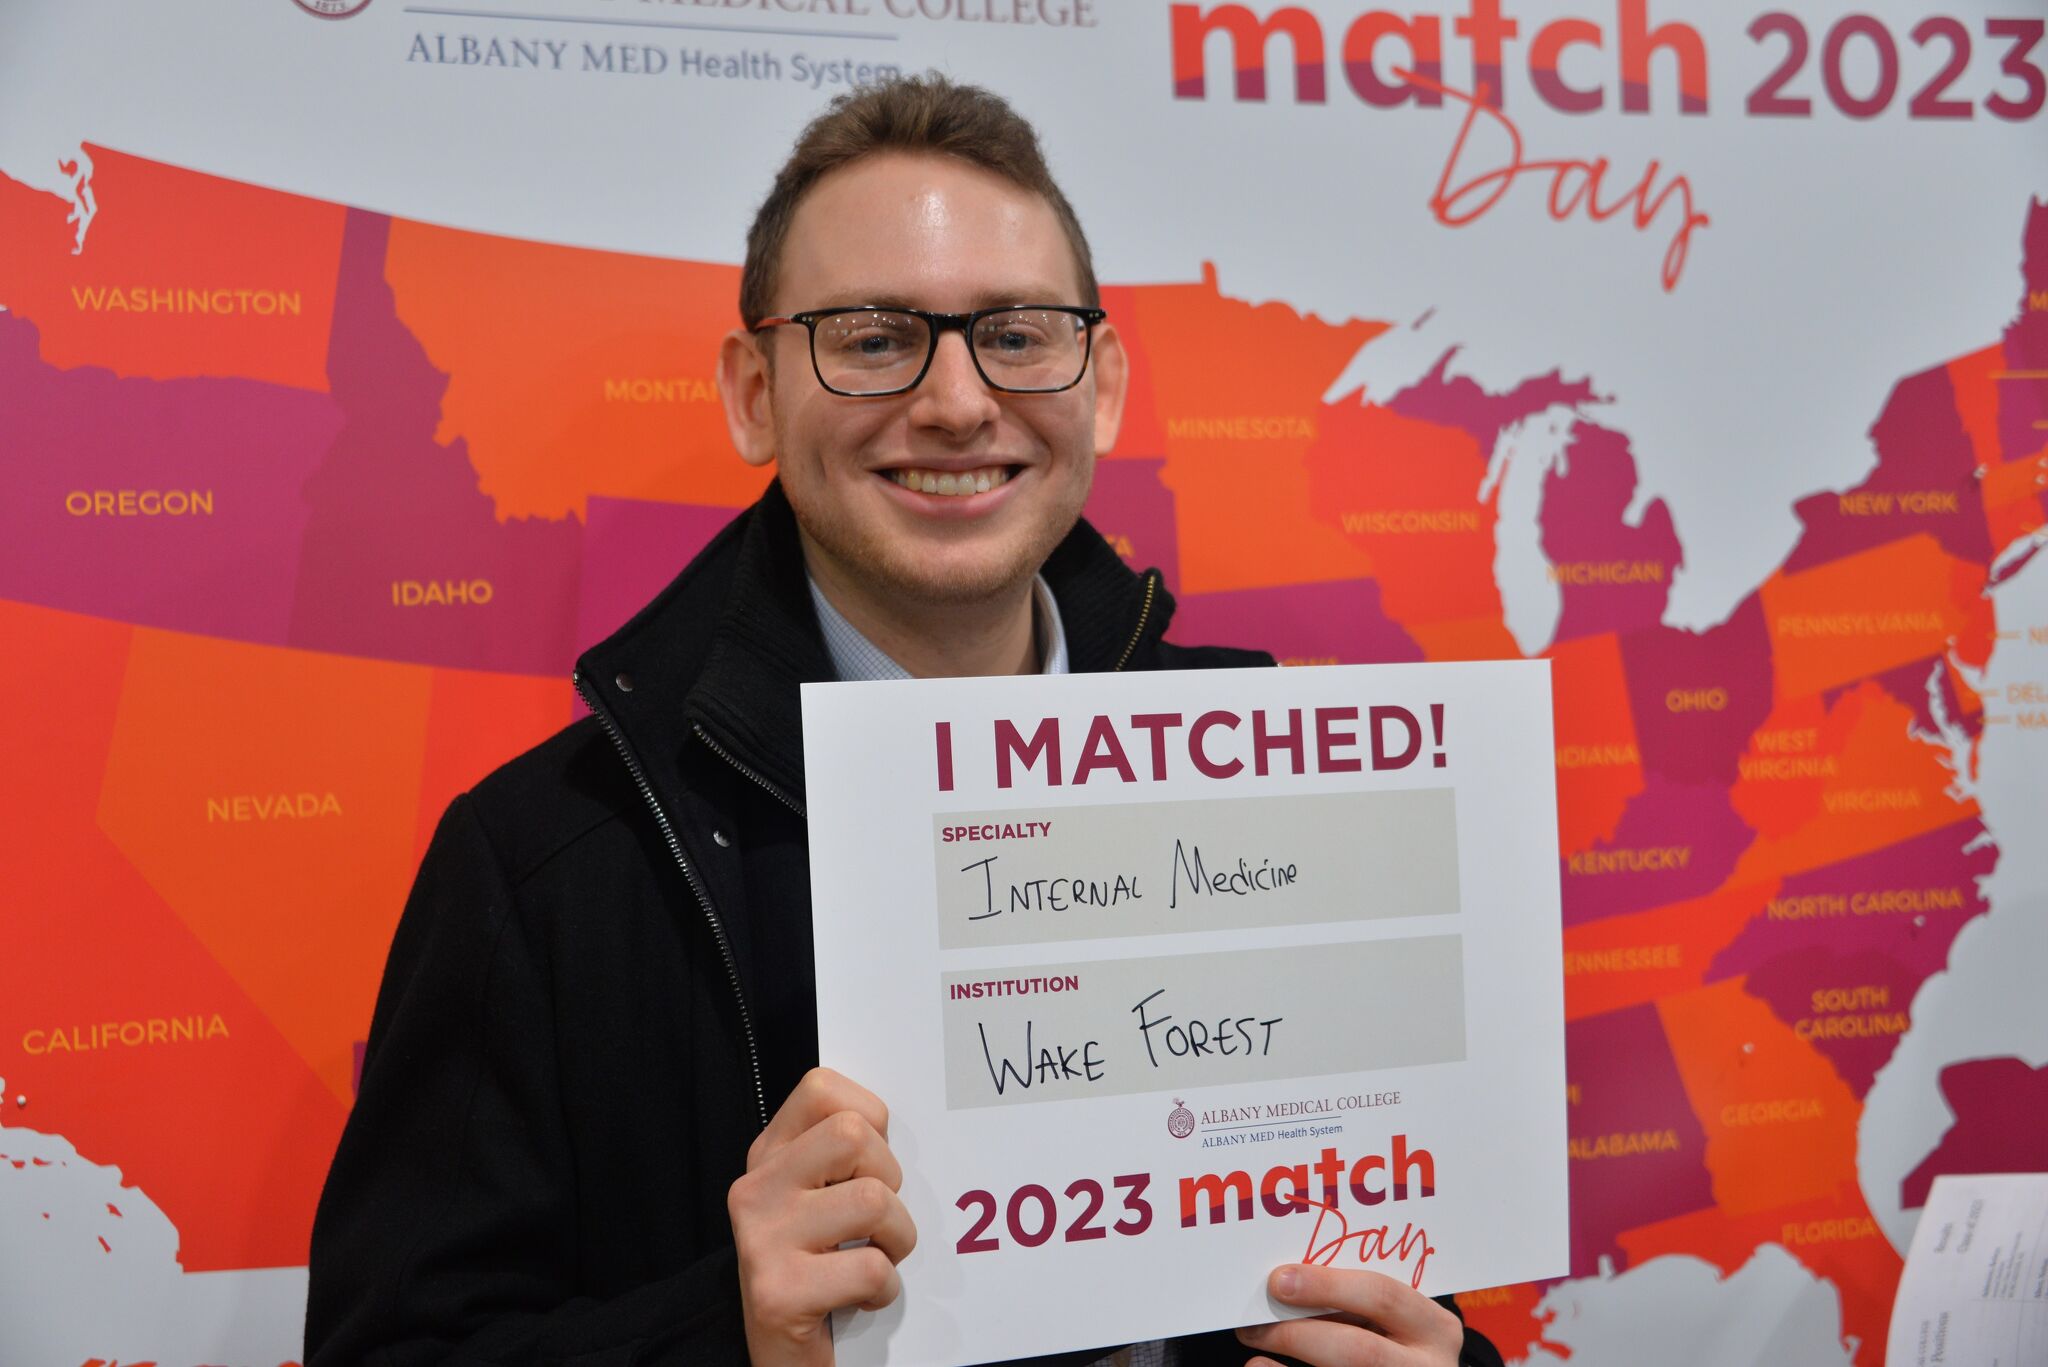 Medical students learn residency assignments on Match Day